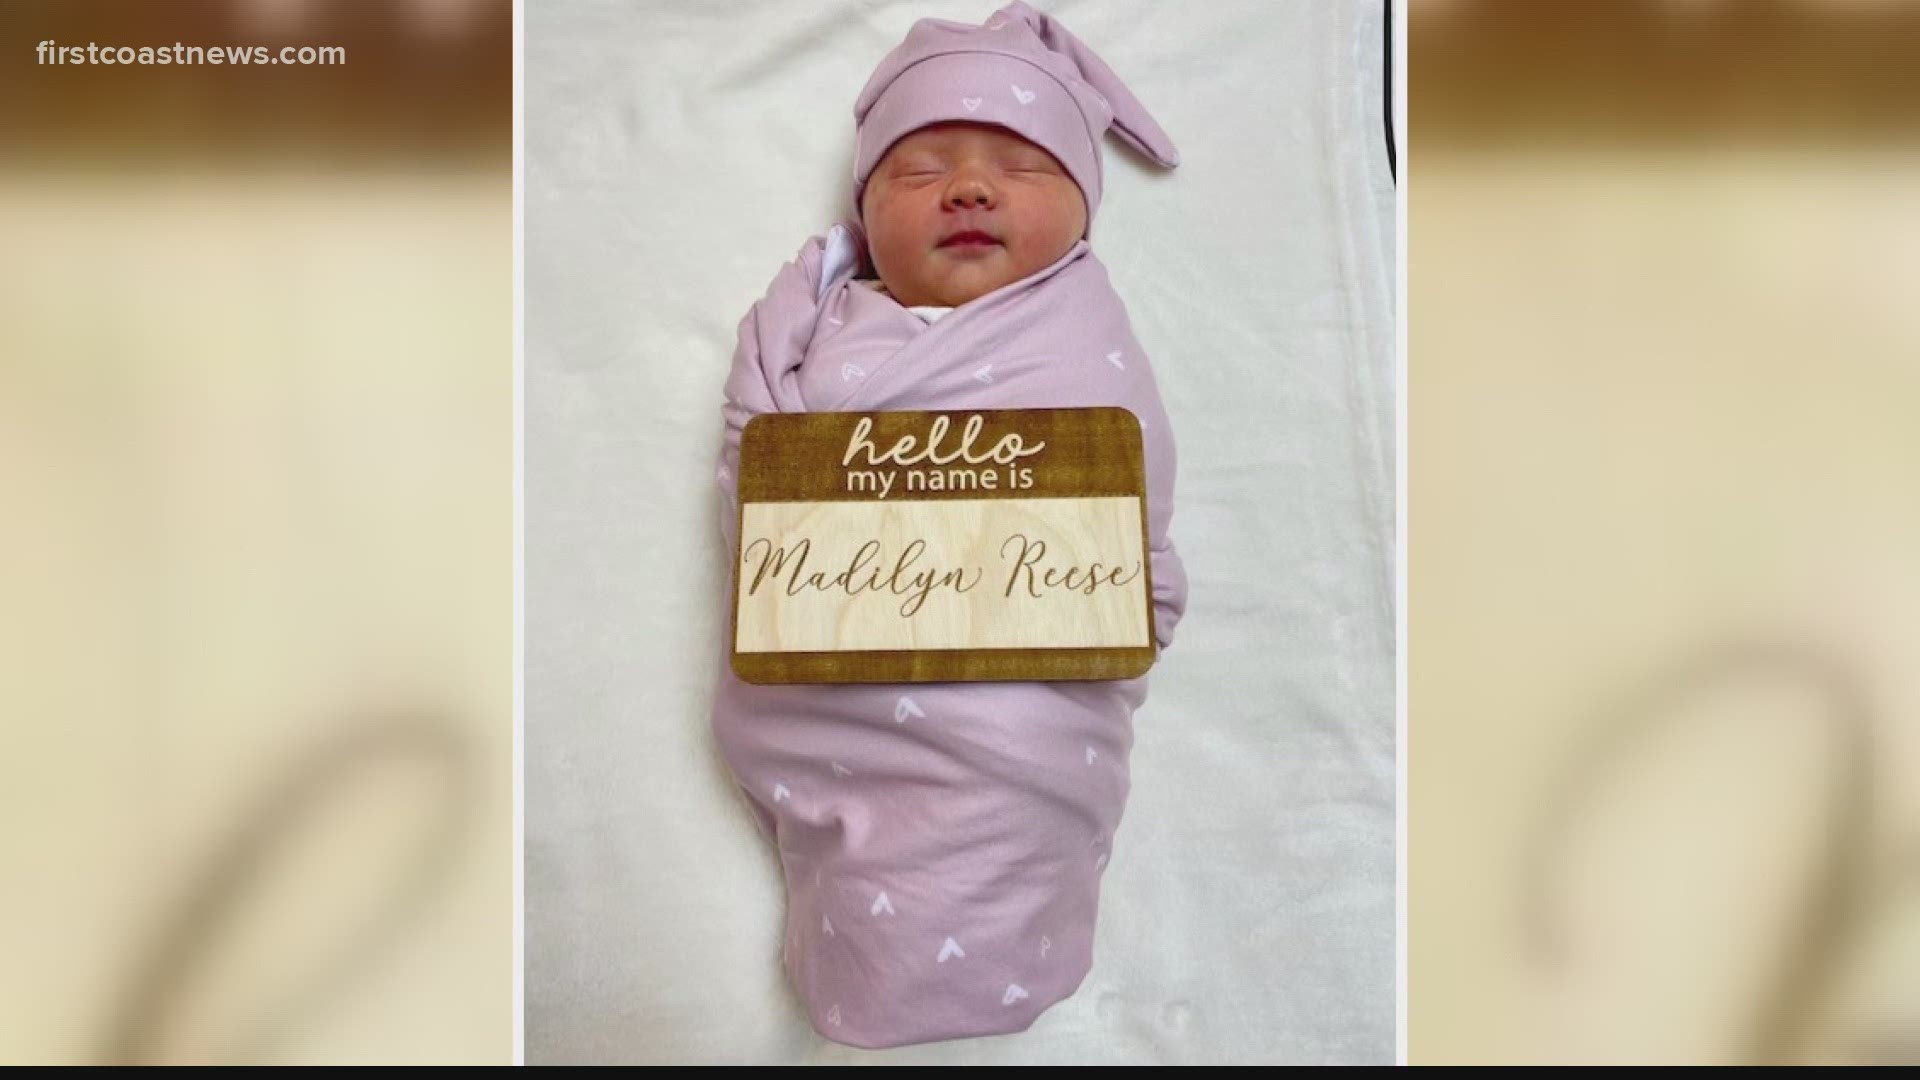 The First Coast News family is excited to welcome Madilyn Reese into the world. Congrats to Meteorologist Lauren Rautenkranz!